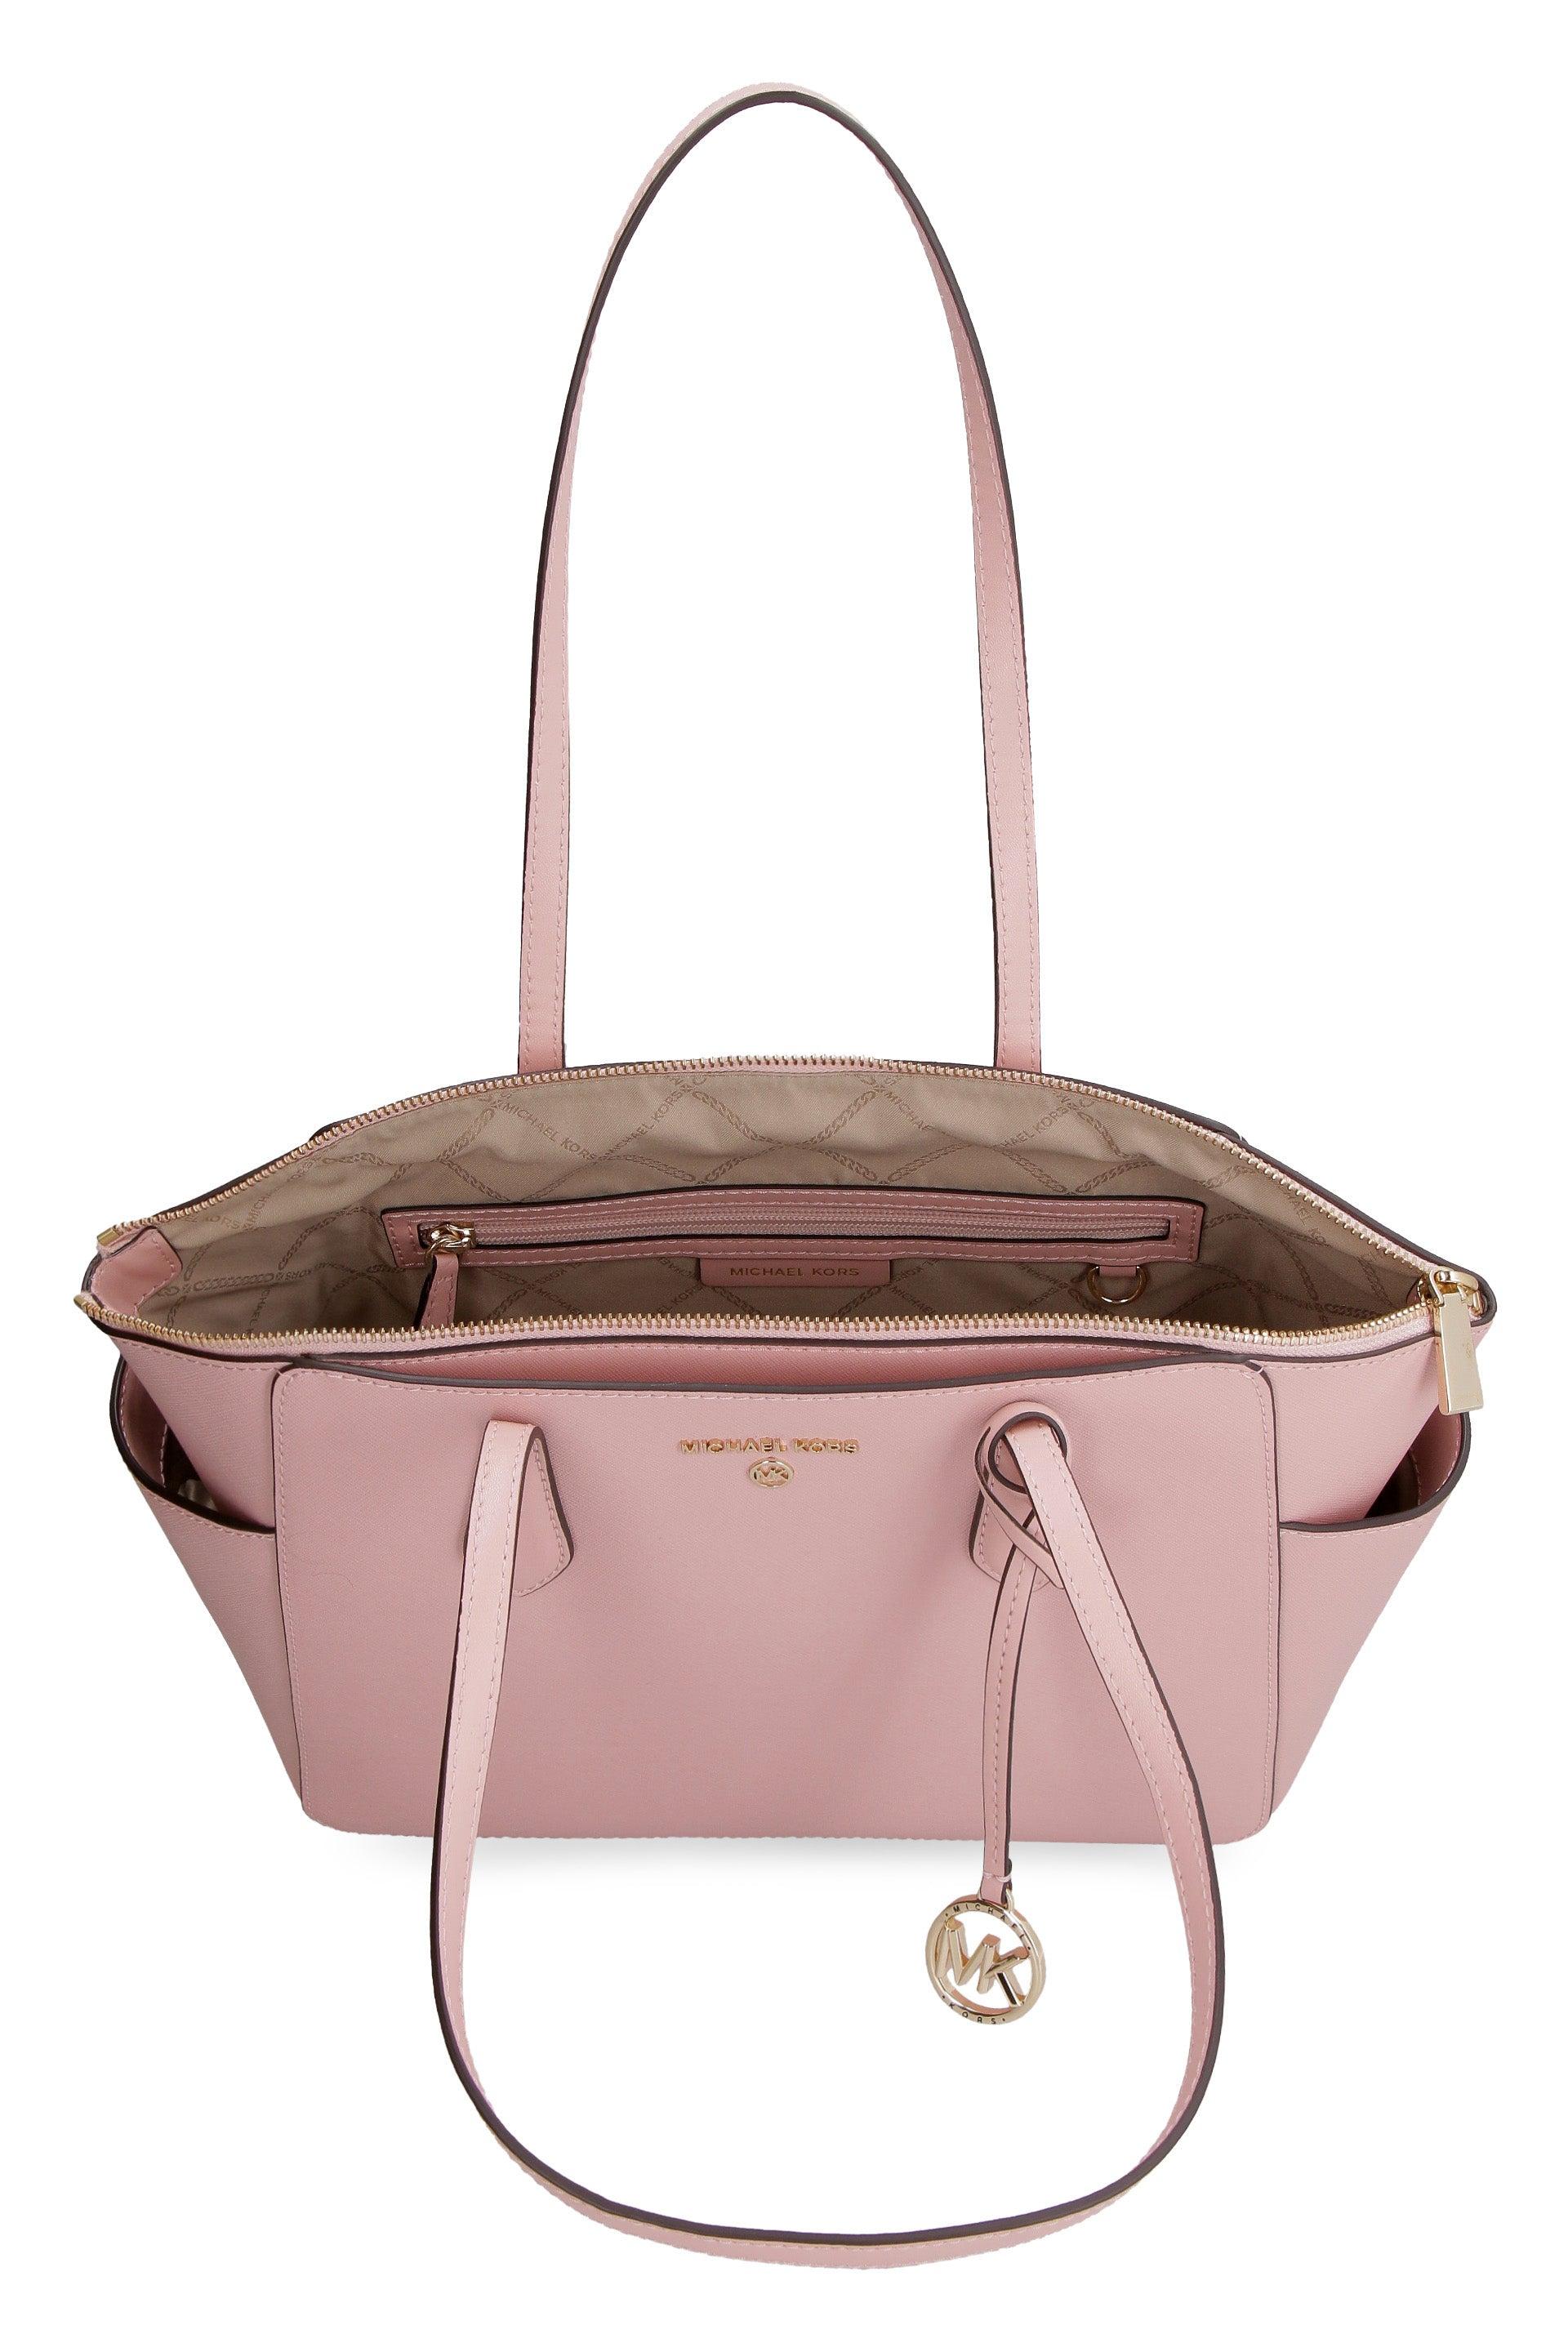 Michael Kors Collection - Marilyn MD TZ Tote Shell Pink - - Catawiki